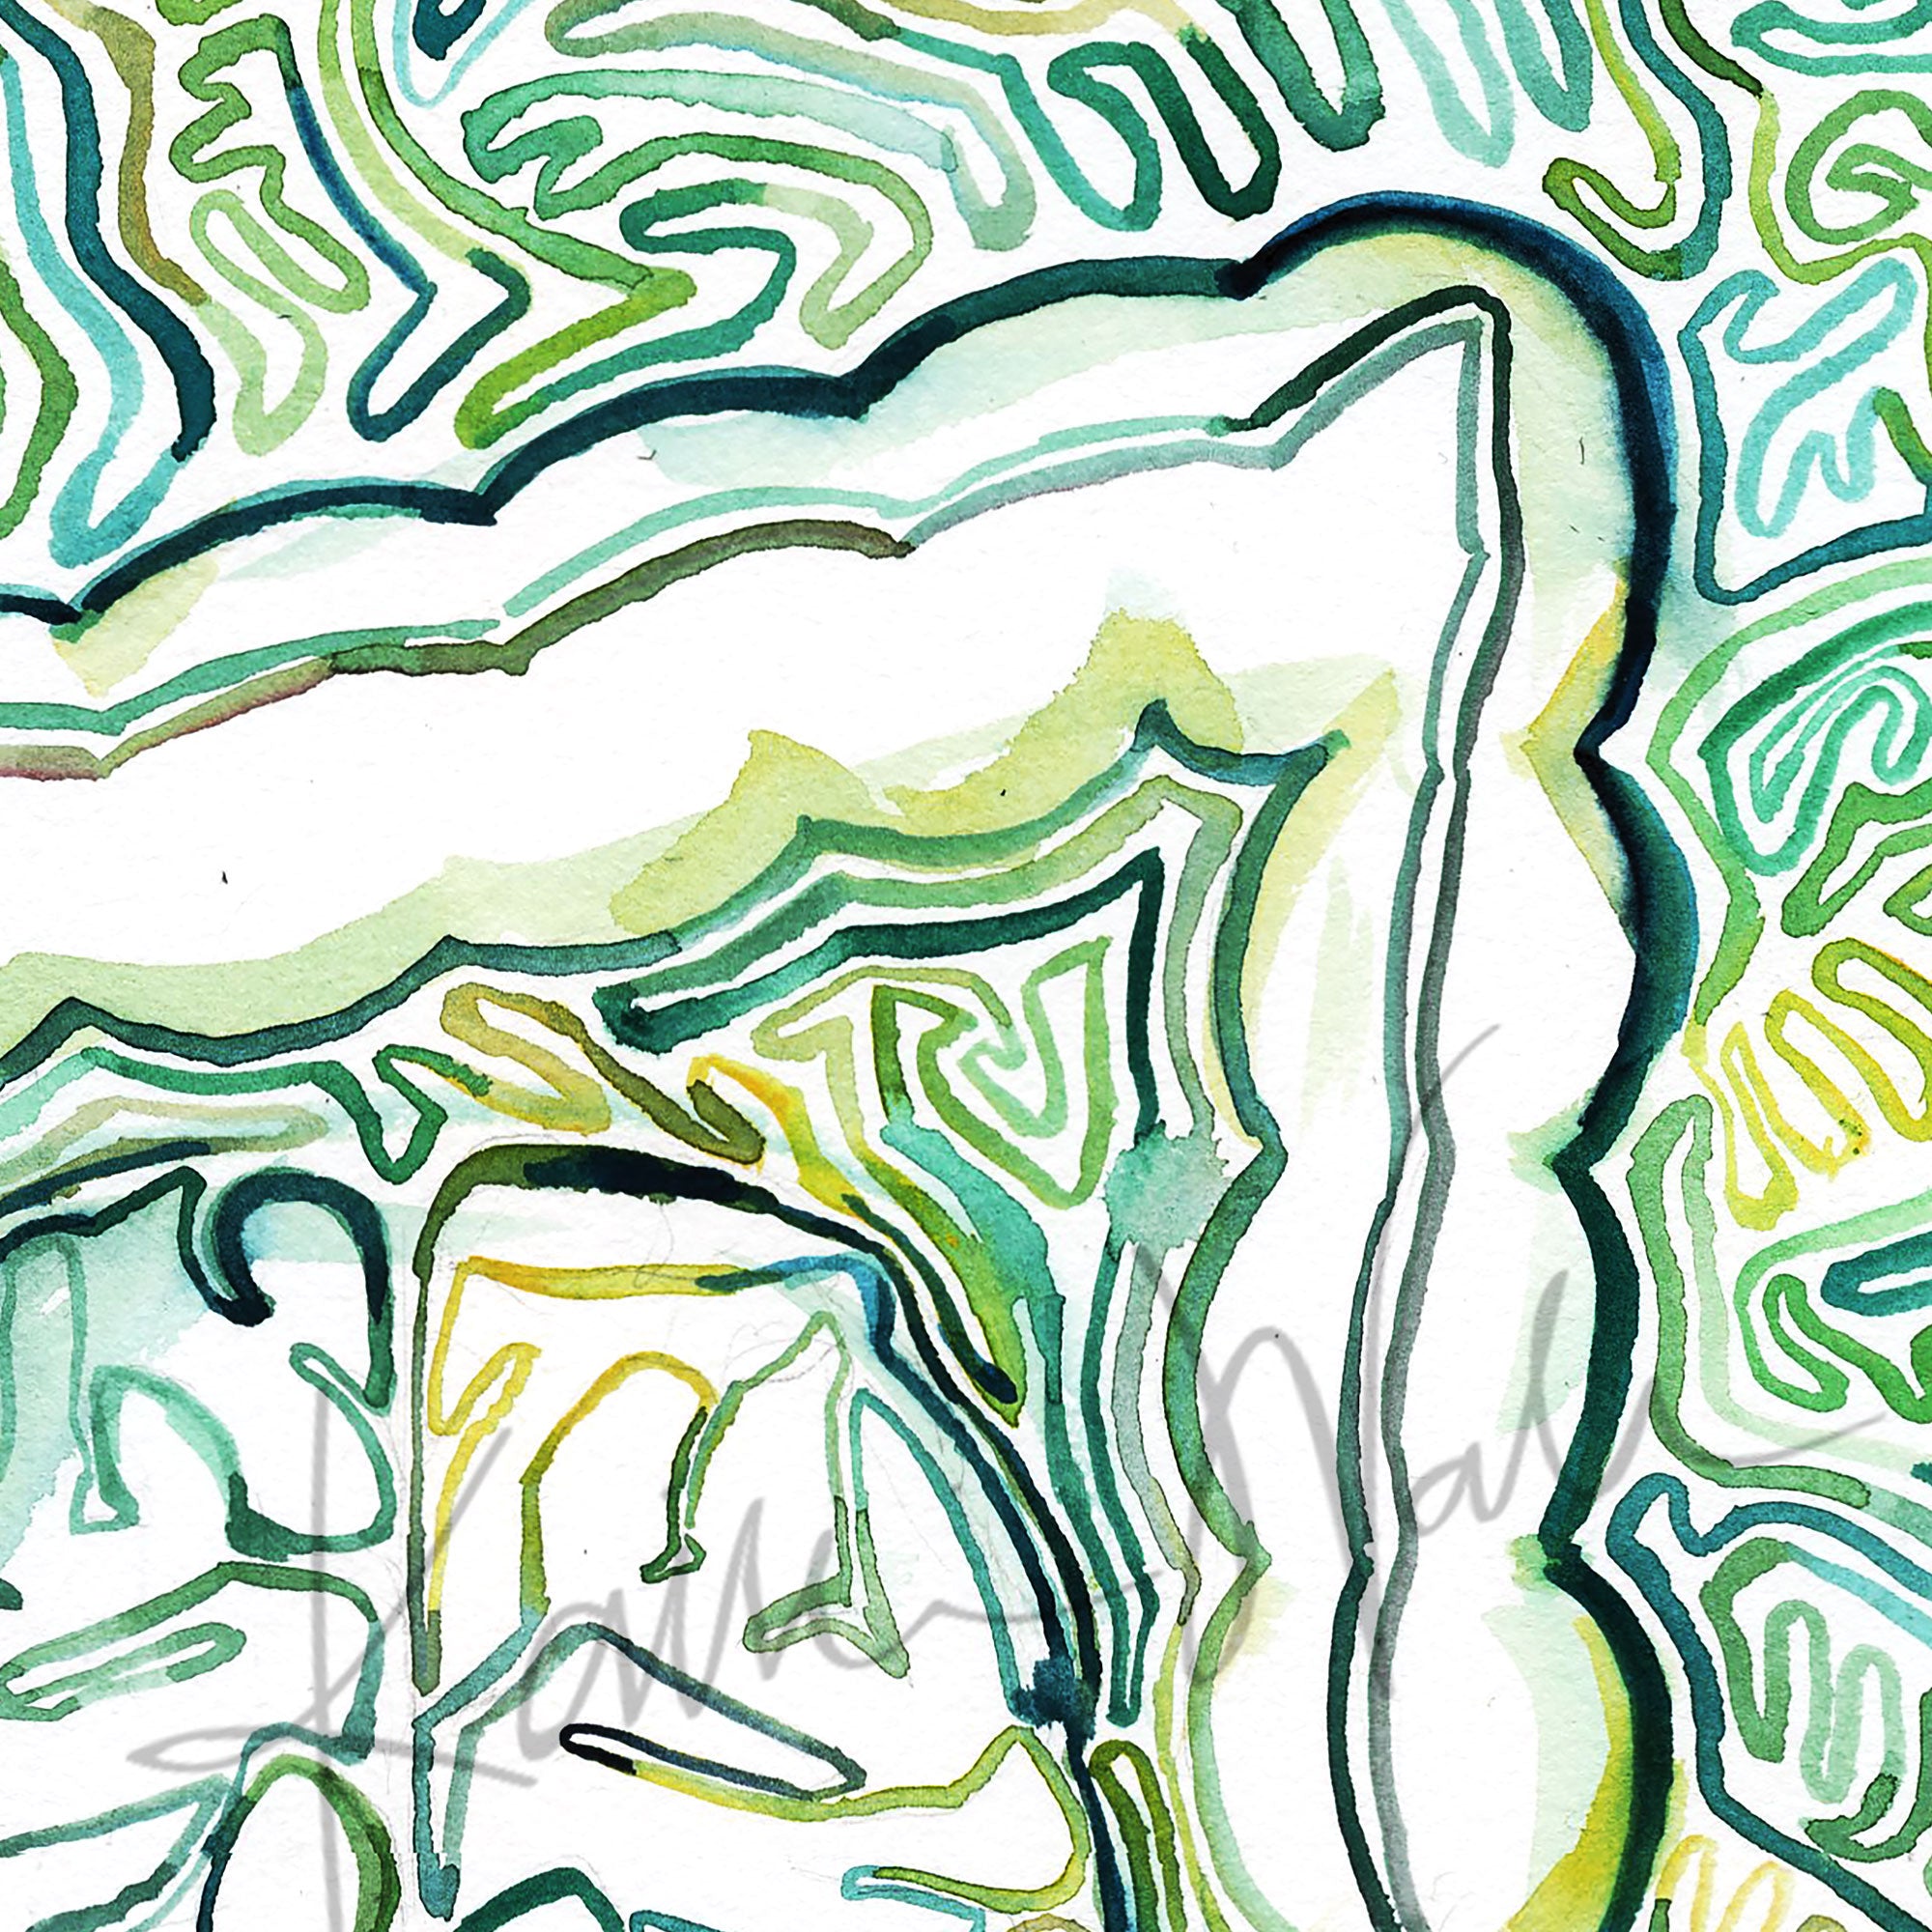 Zoomed in view of a watercolor painting of a portrayal of the gut-mind-body connection.